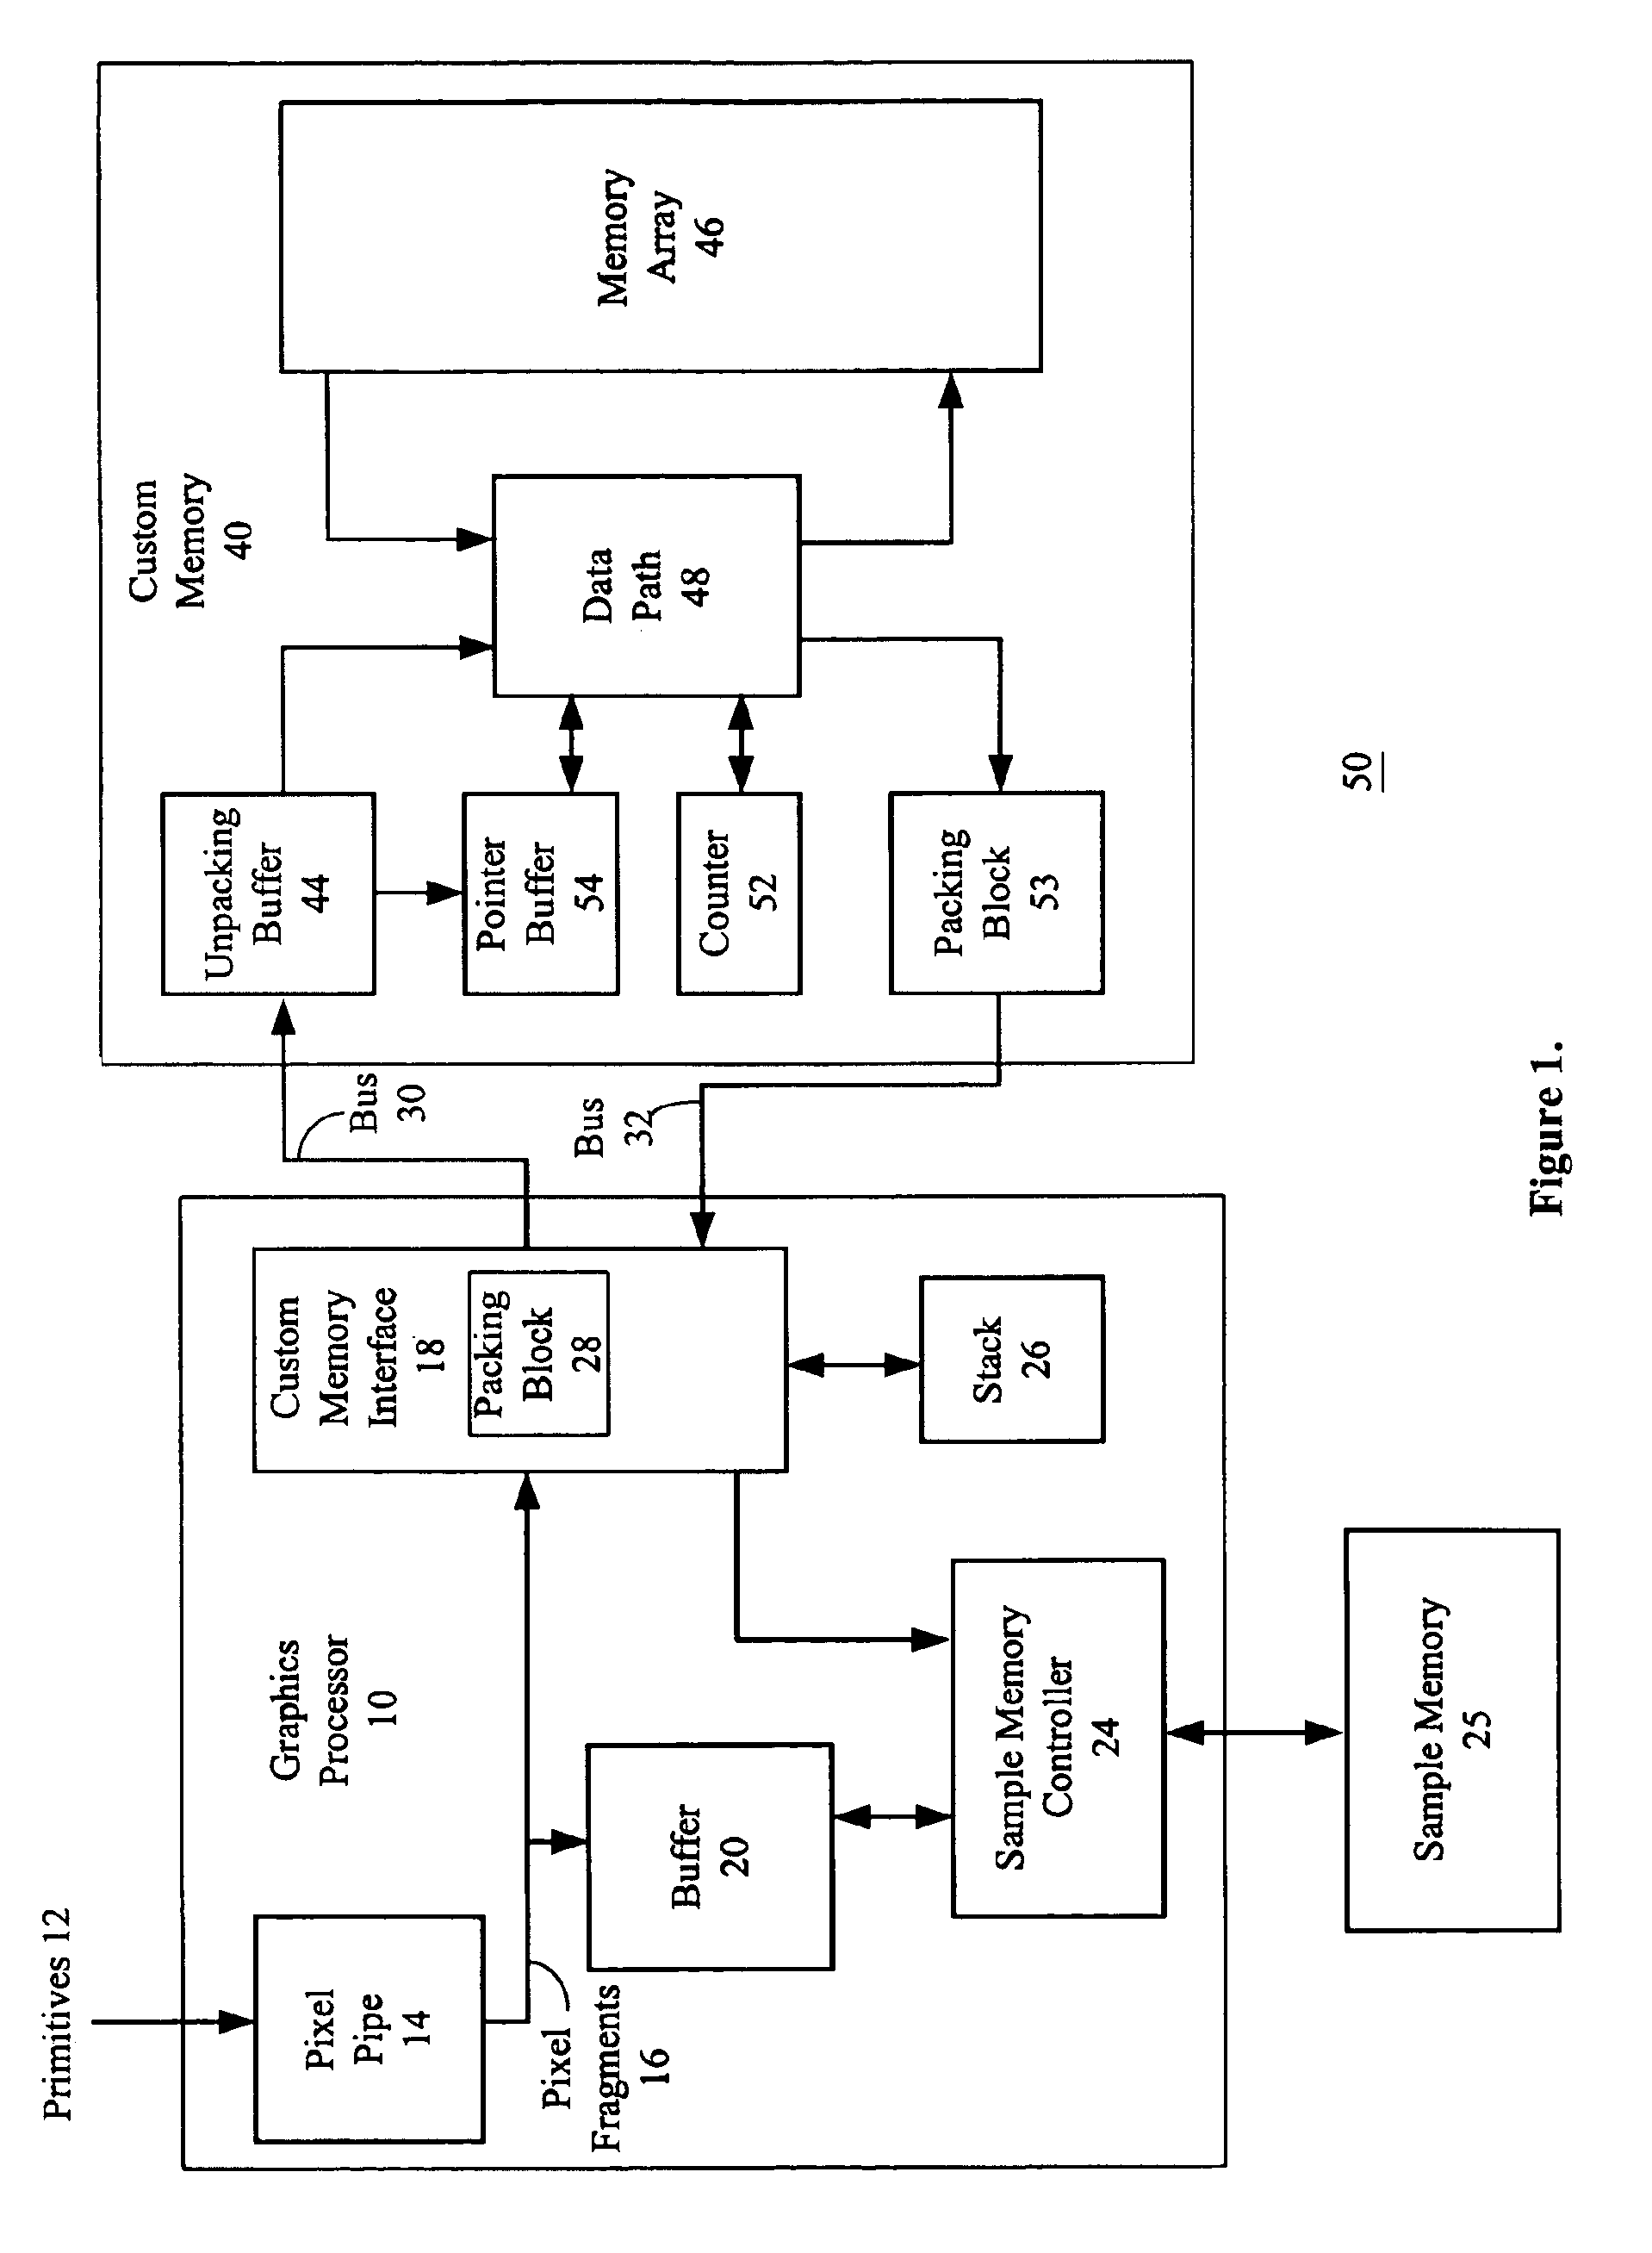 Video graphics system that includes custom memory and supports anti-aliasing and method therefor